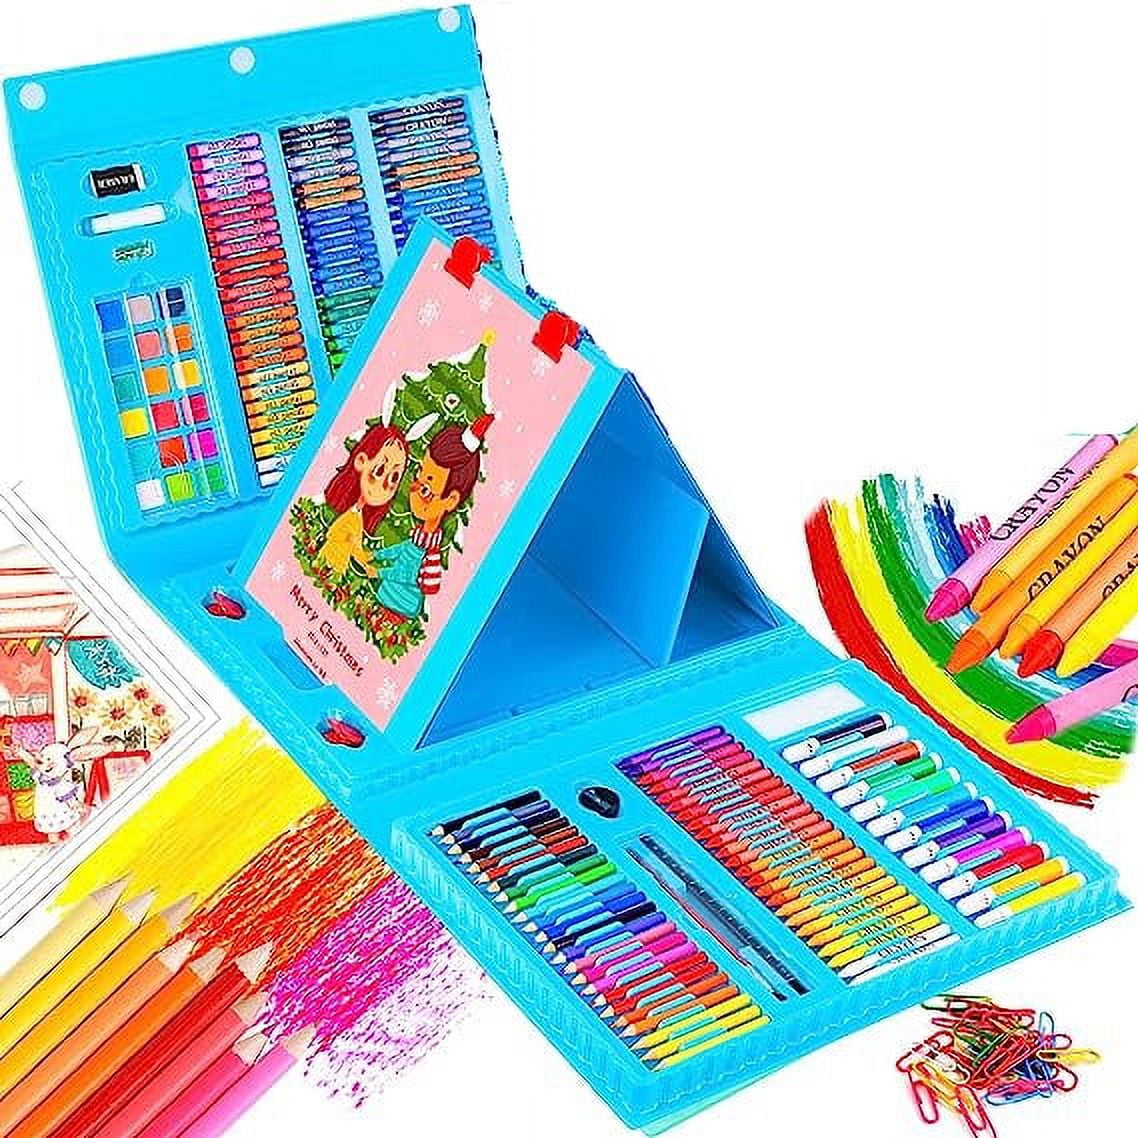 XTEILC Art Kit, Art Supplies Drawing Kits, Arts and Crafts for Kids, Gifts for Teen Girls Boys 6-8-9-12, Art Set Case with Trifold Easel, Sketch Pad